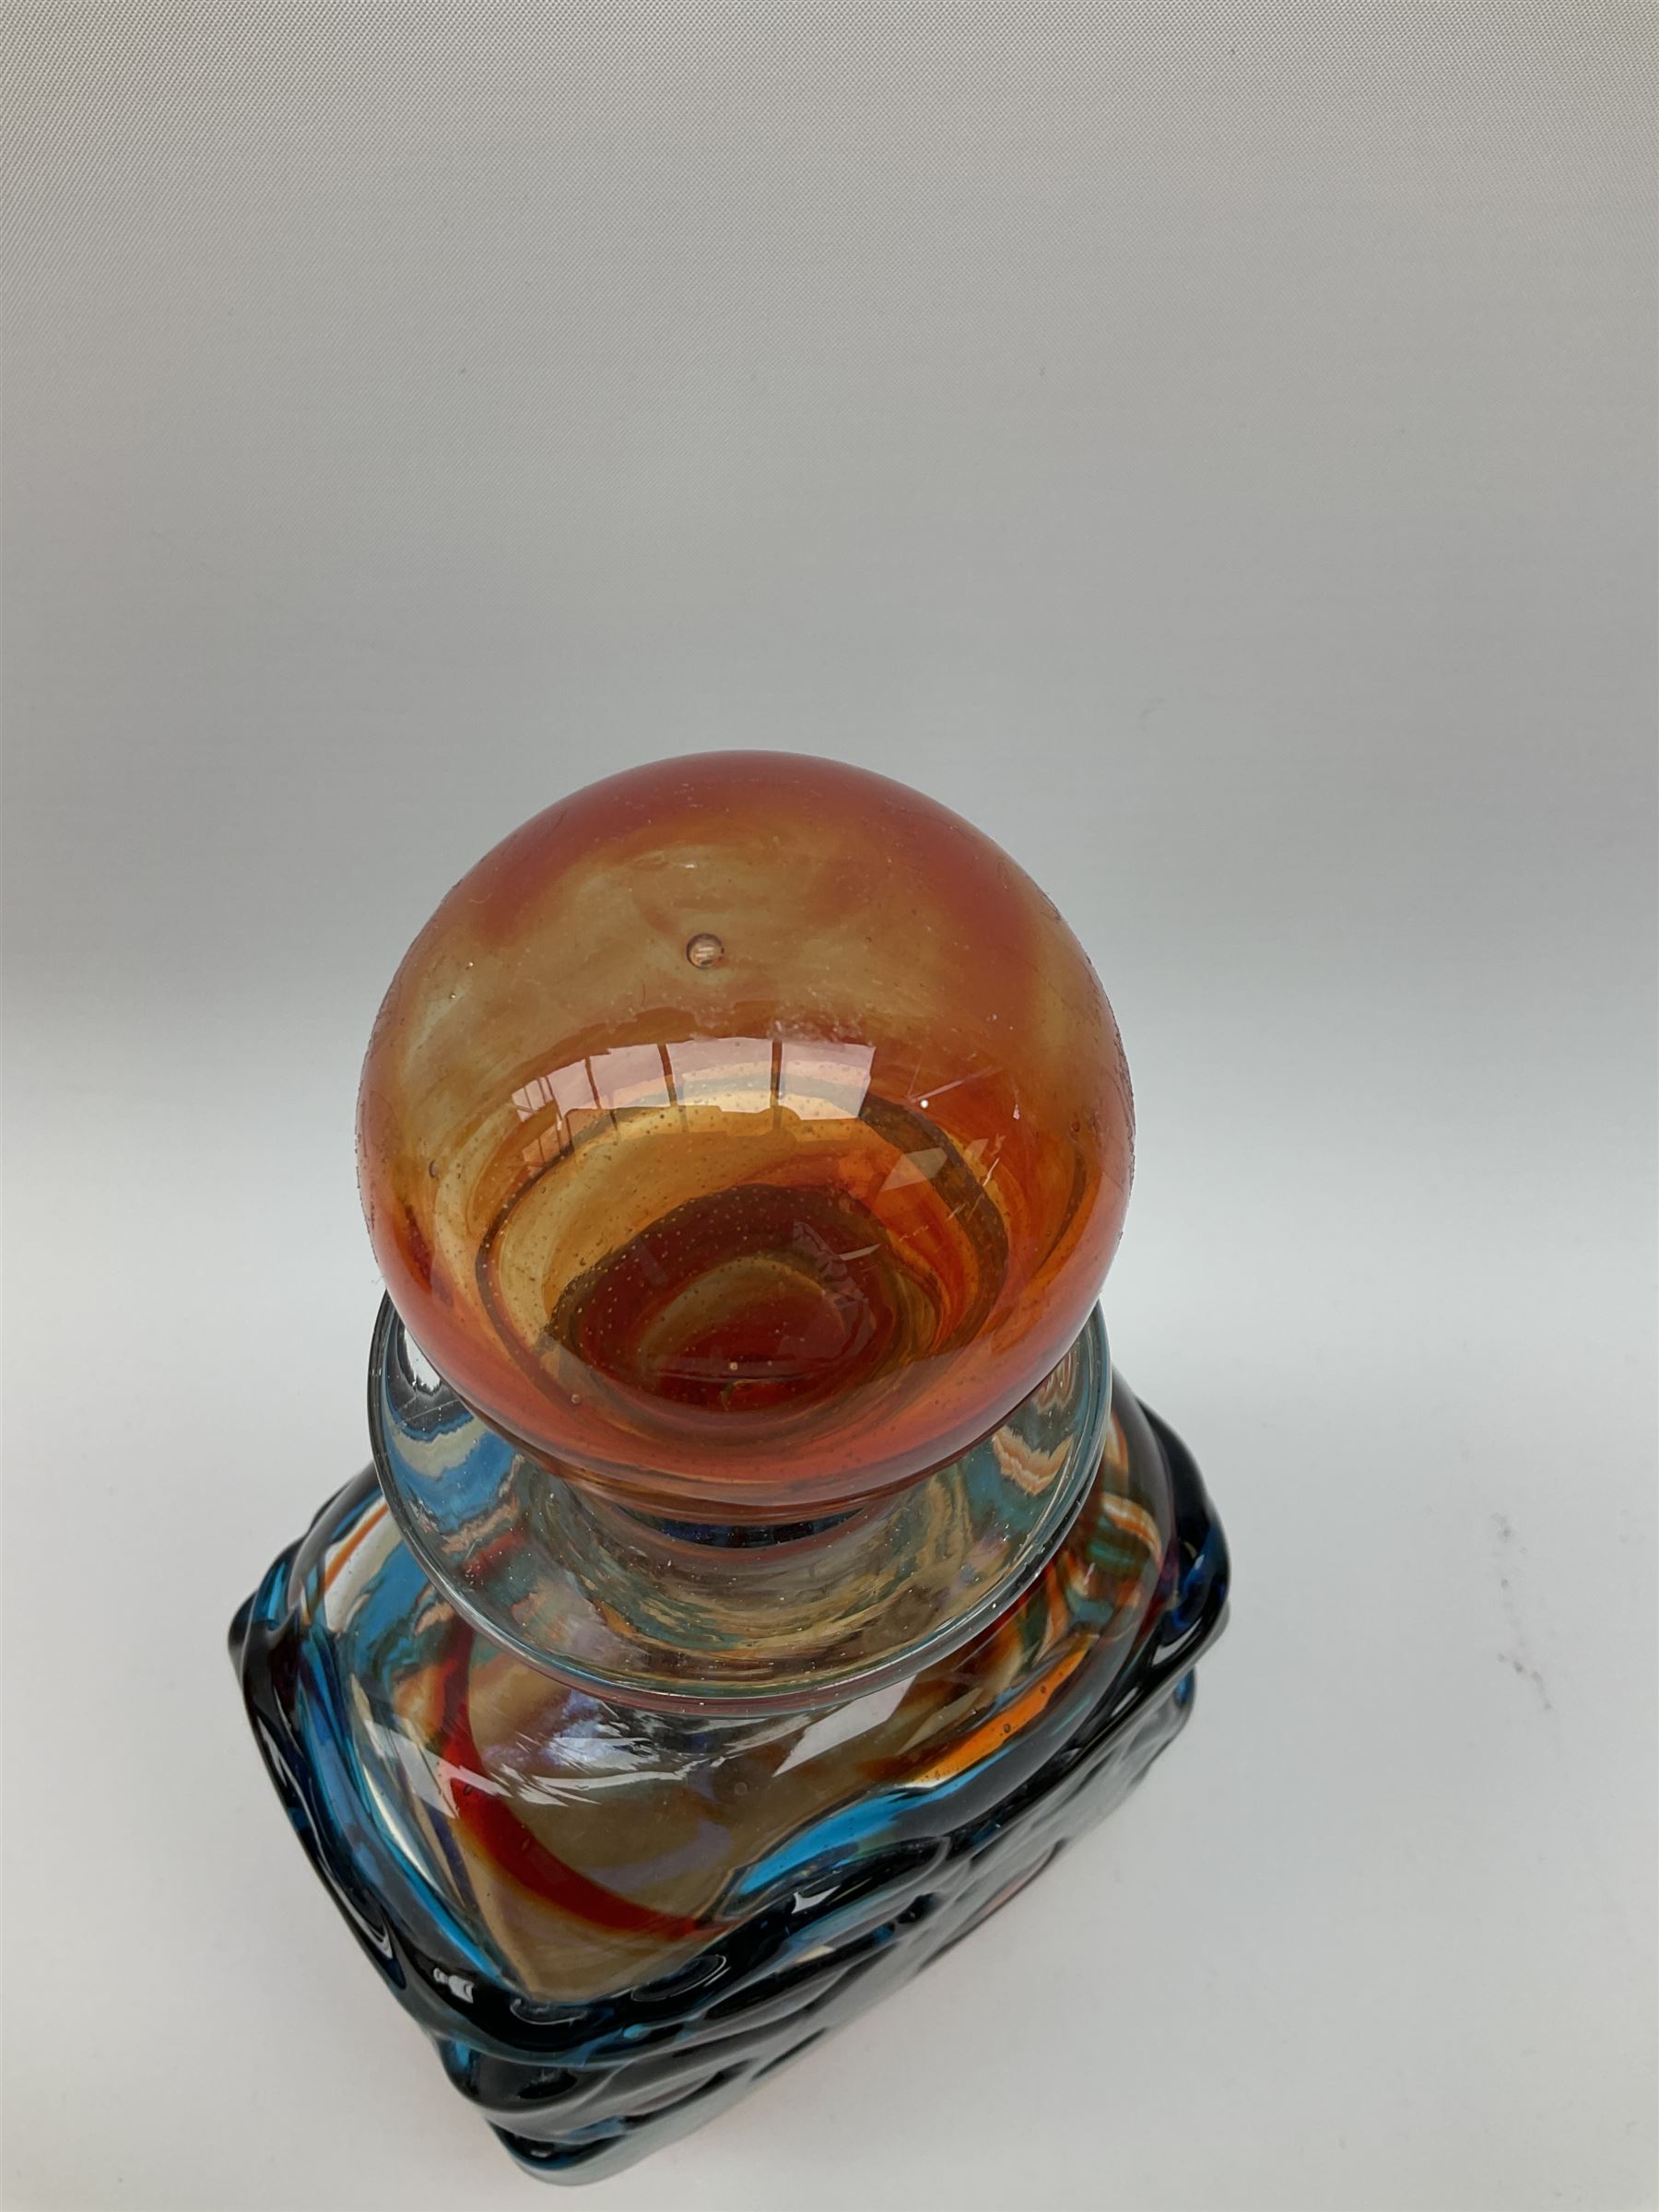 Mdina art glass decanter of red and orange glass with blue trellis work - Image 5 of 18